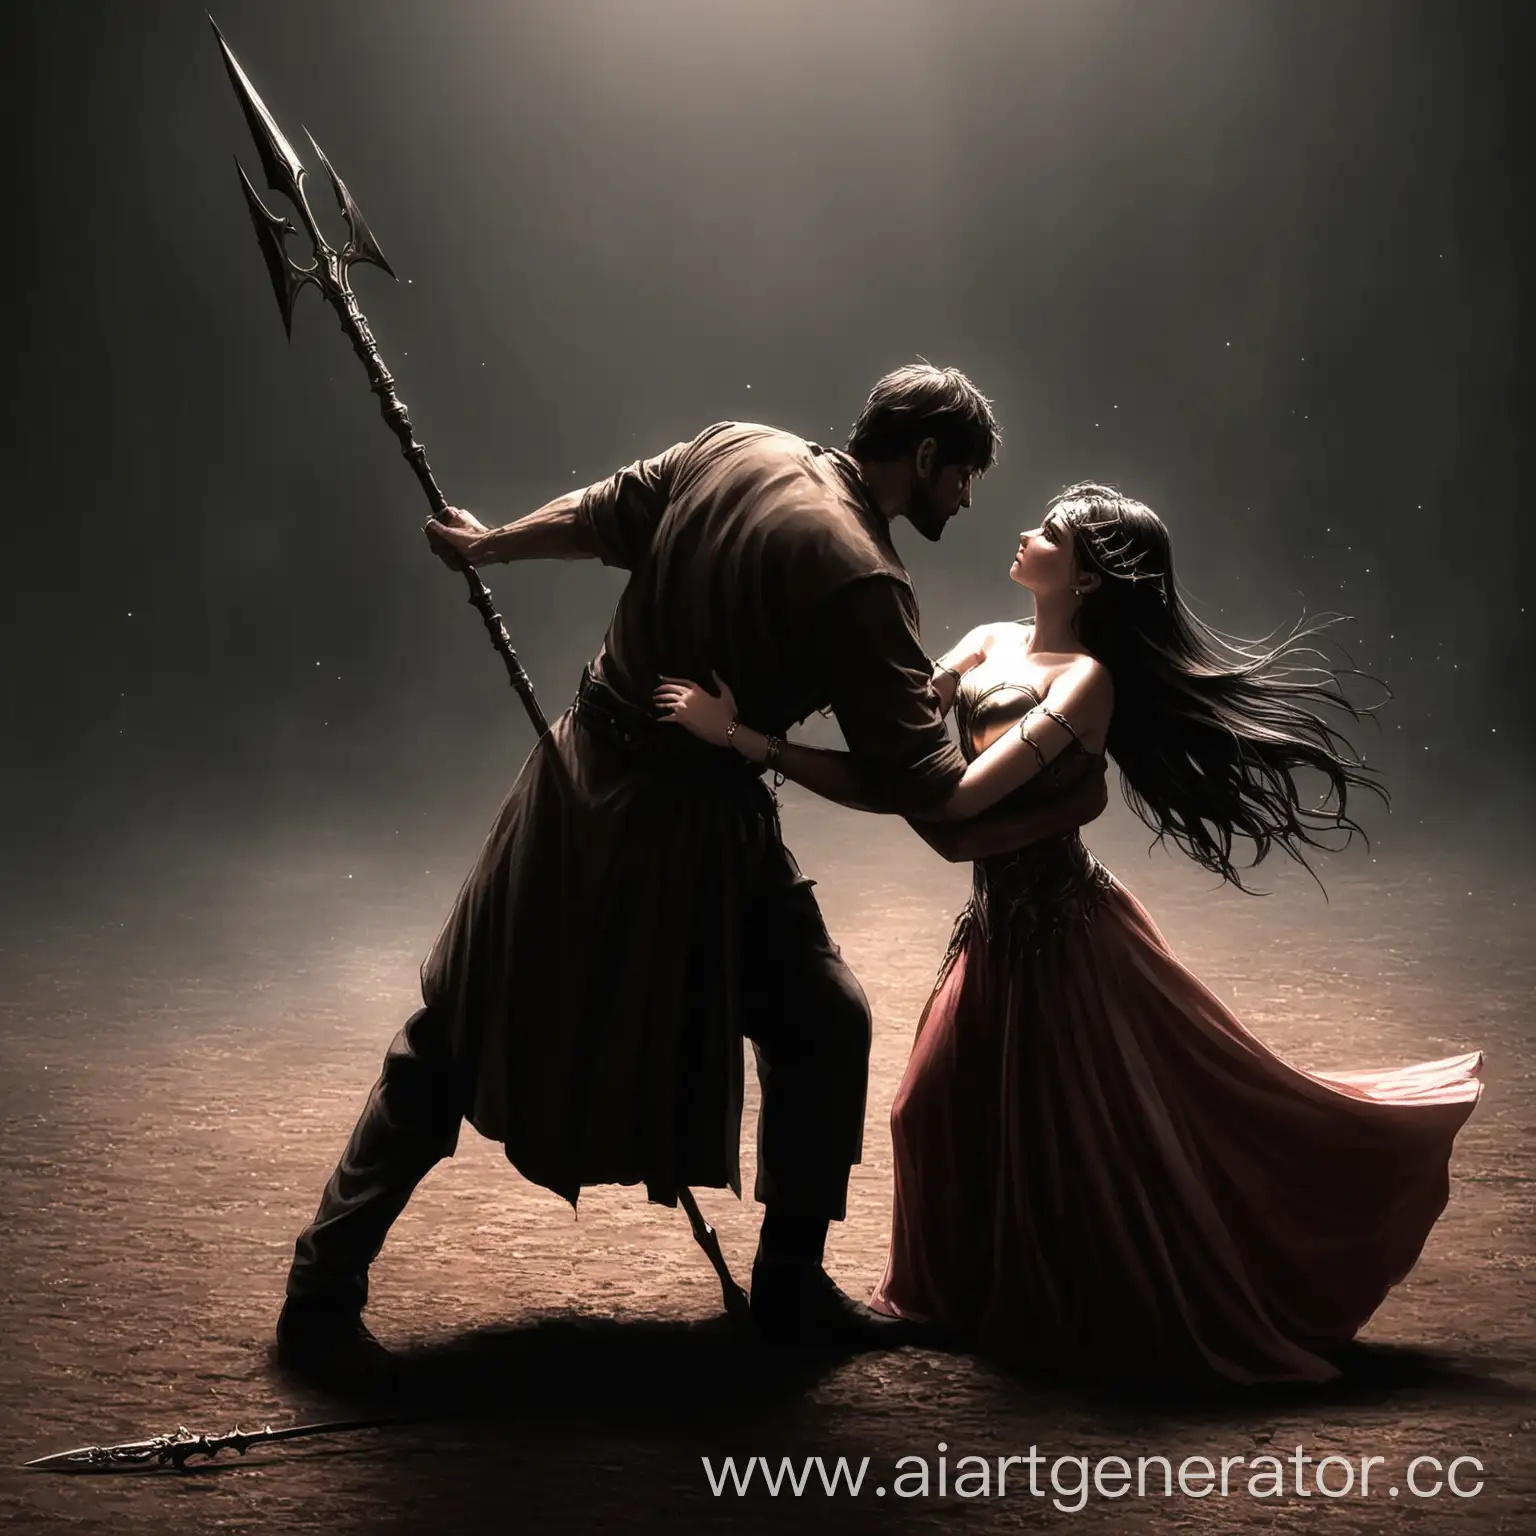 The girl pierces the man's heart with a spear.